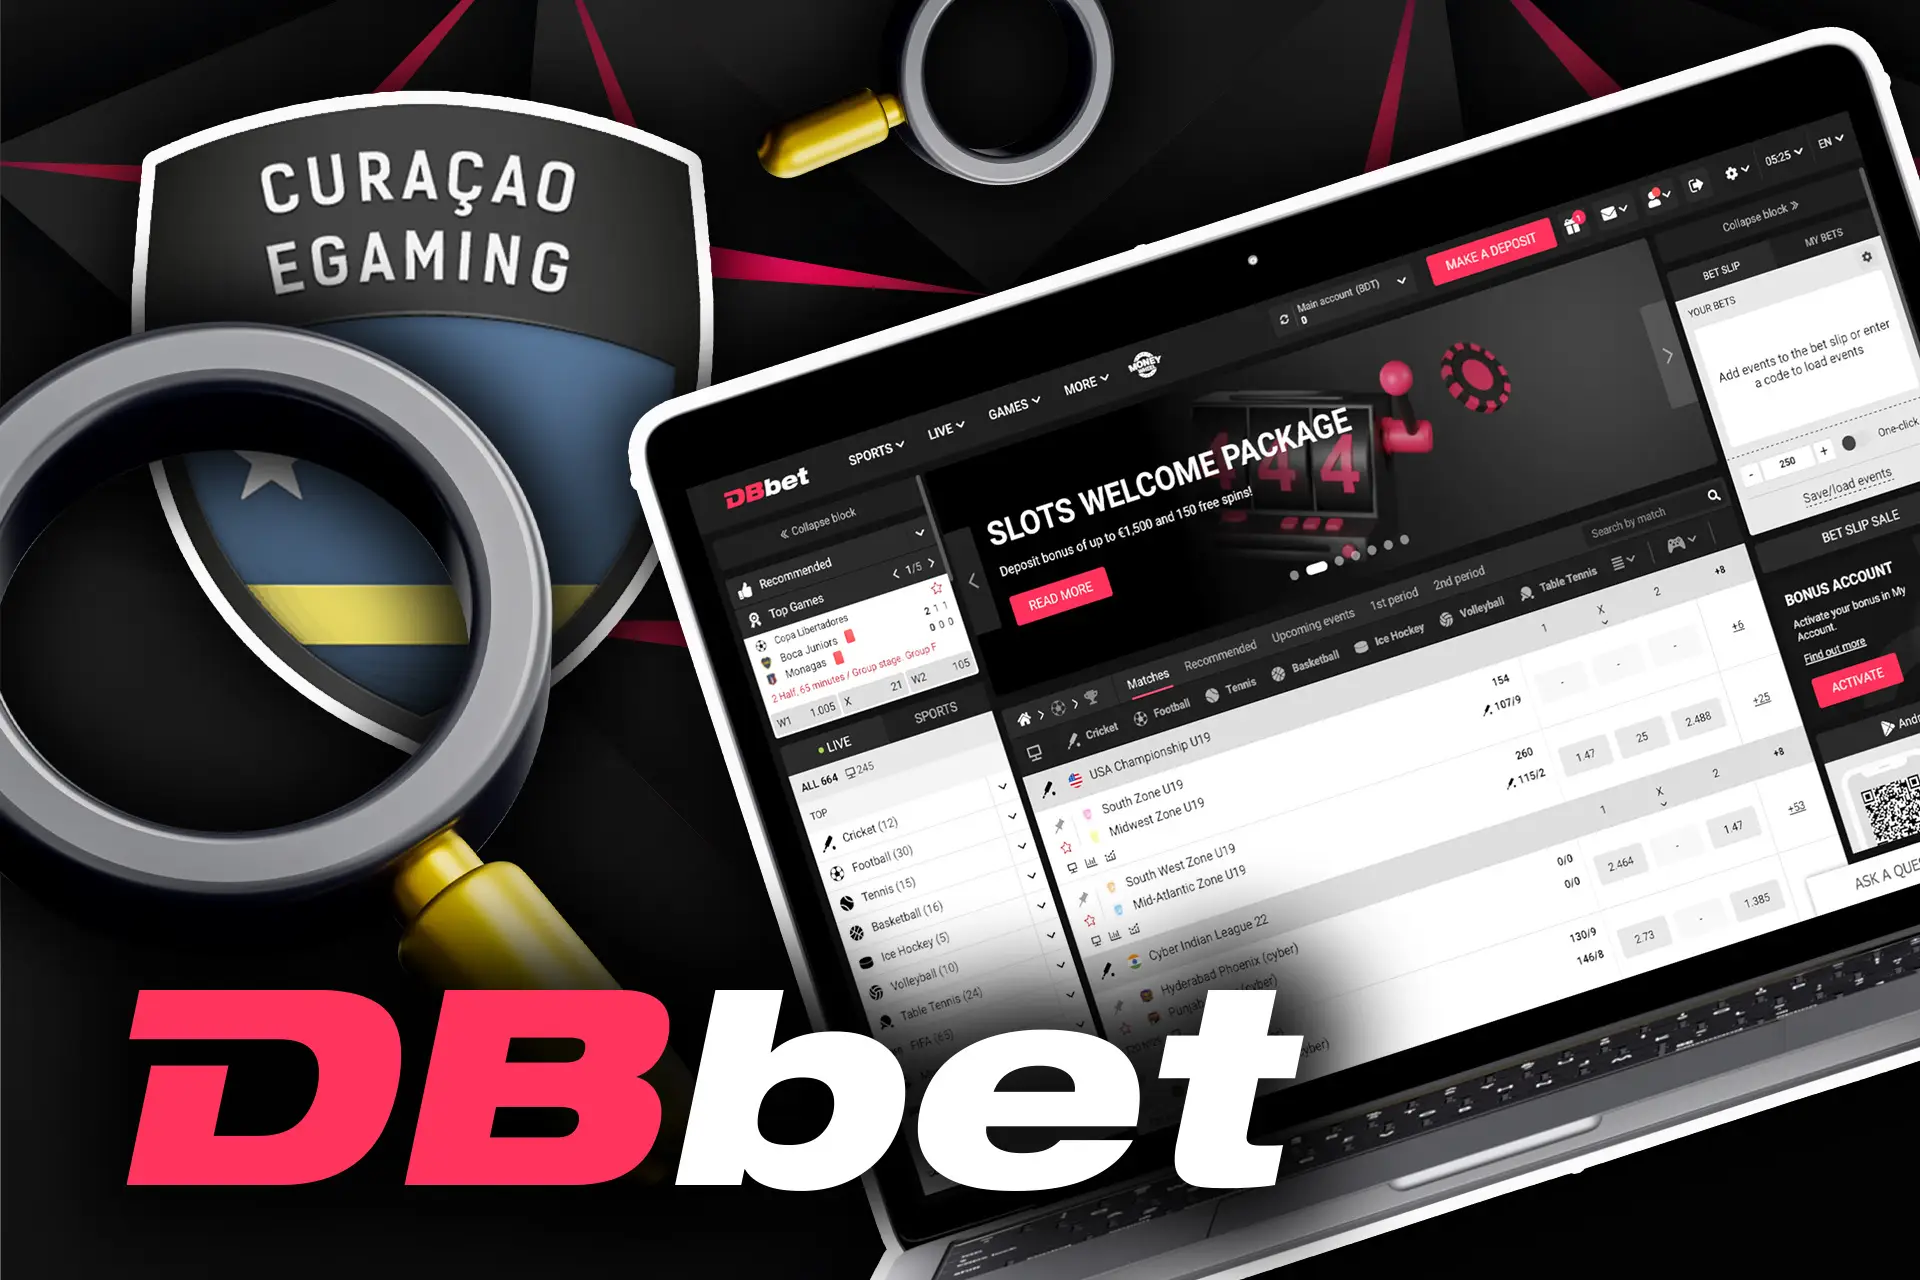 Do not use data from the DBbet site, it is protected by copyright.